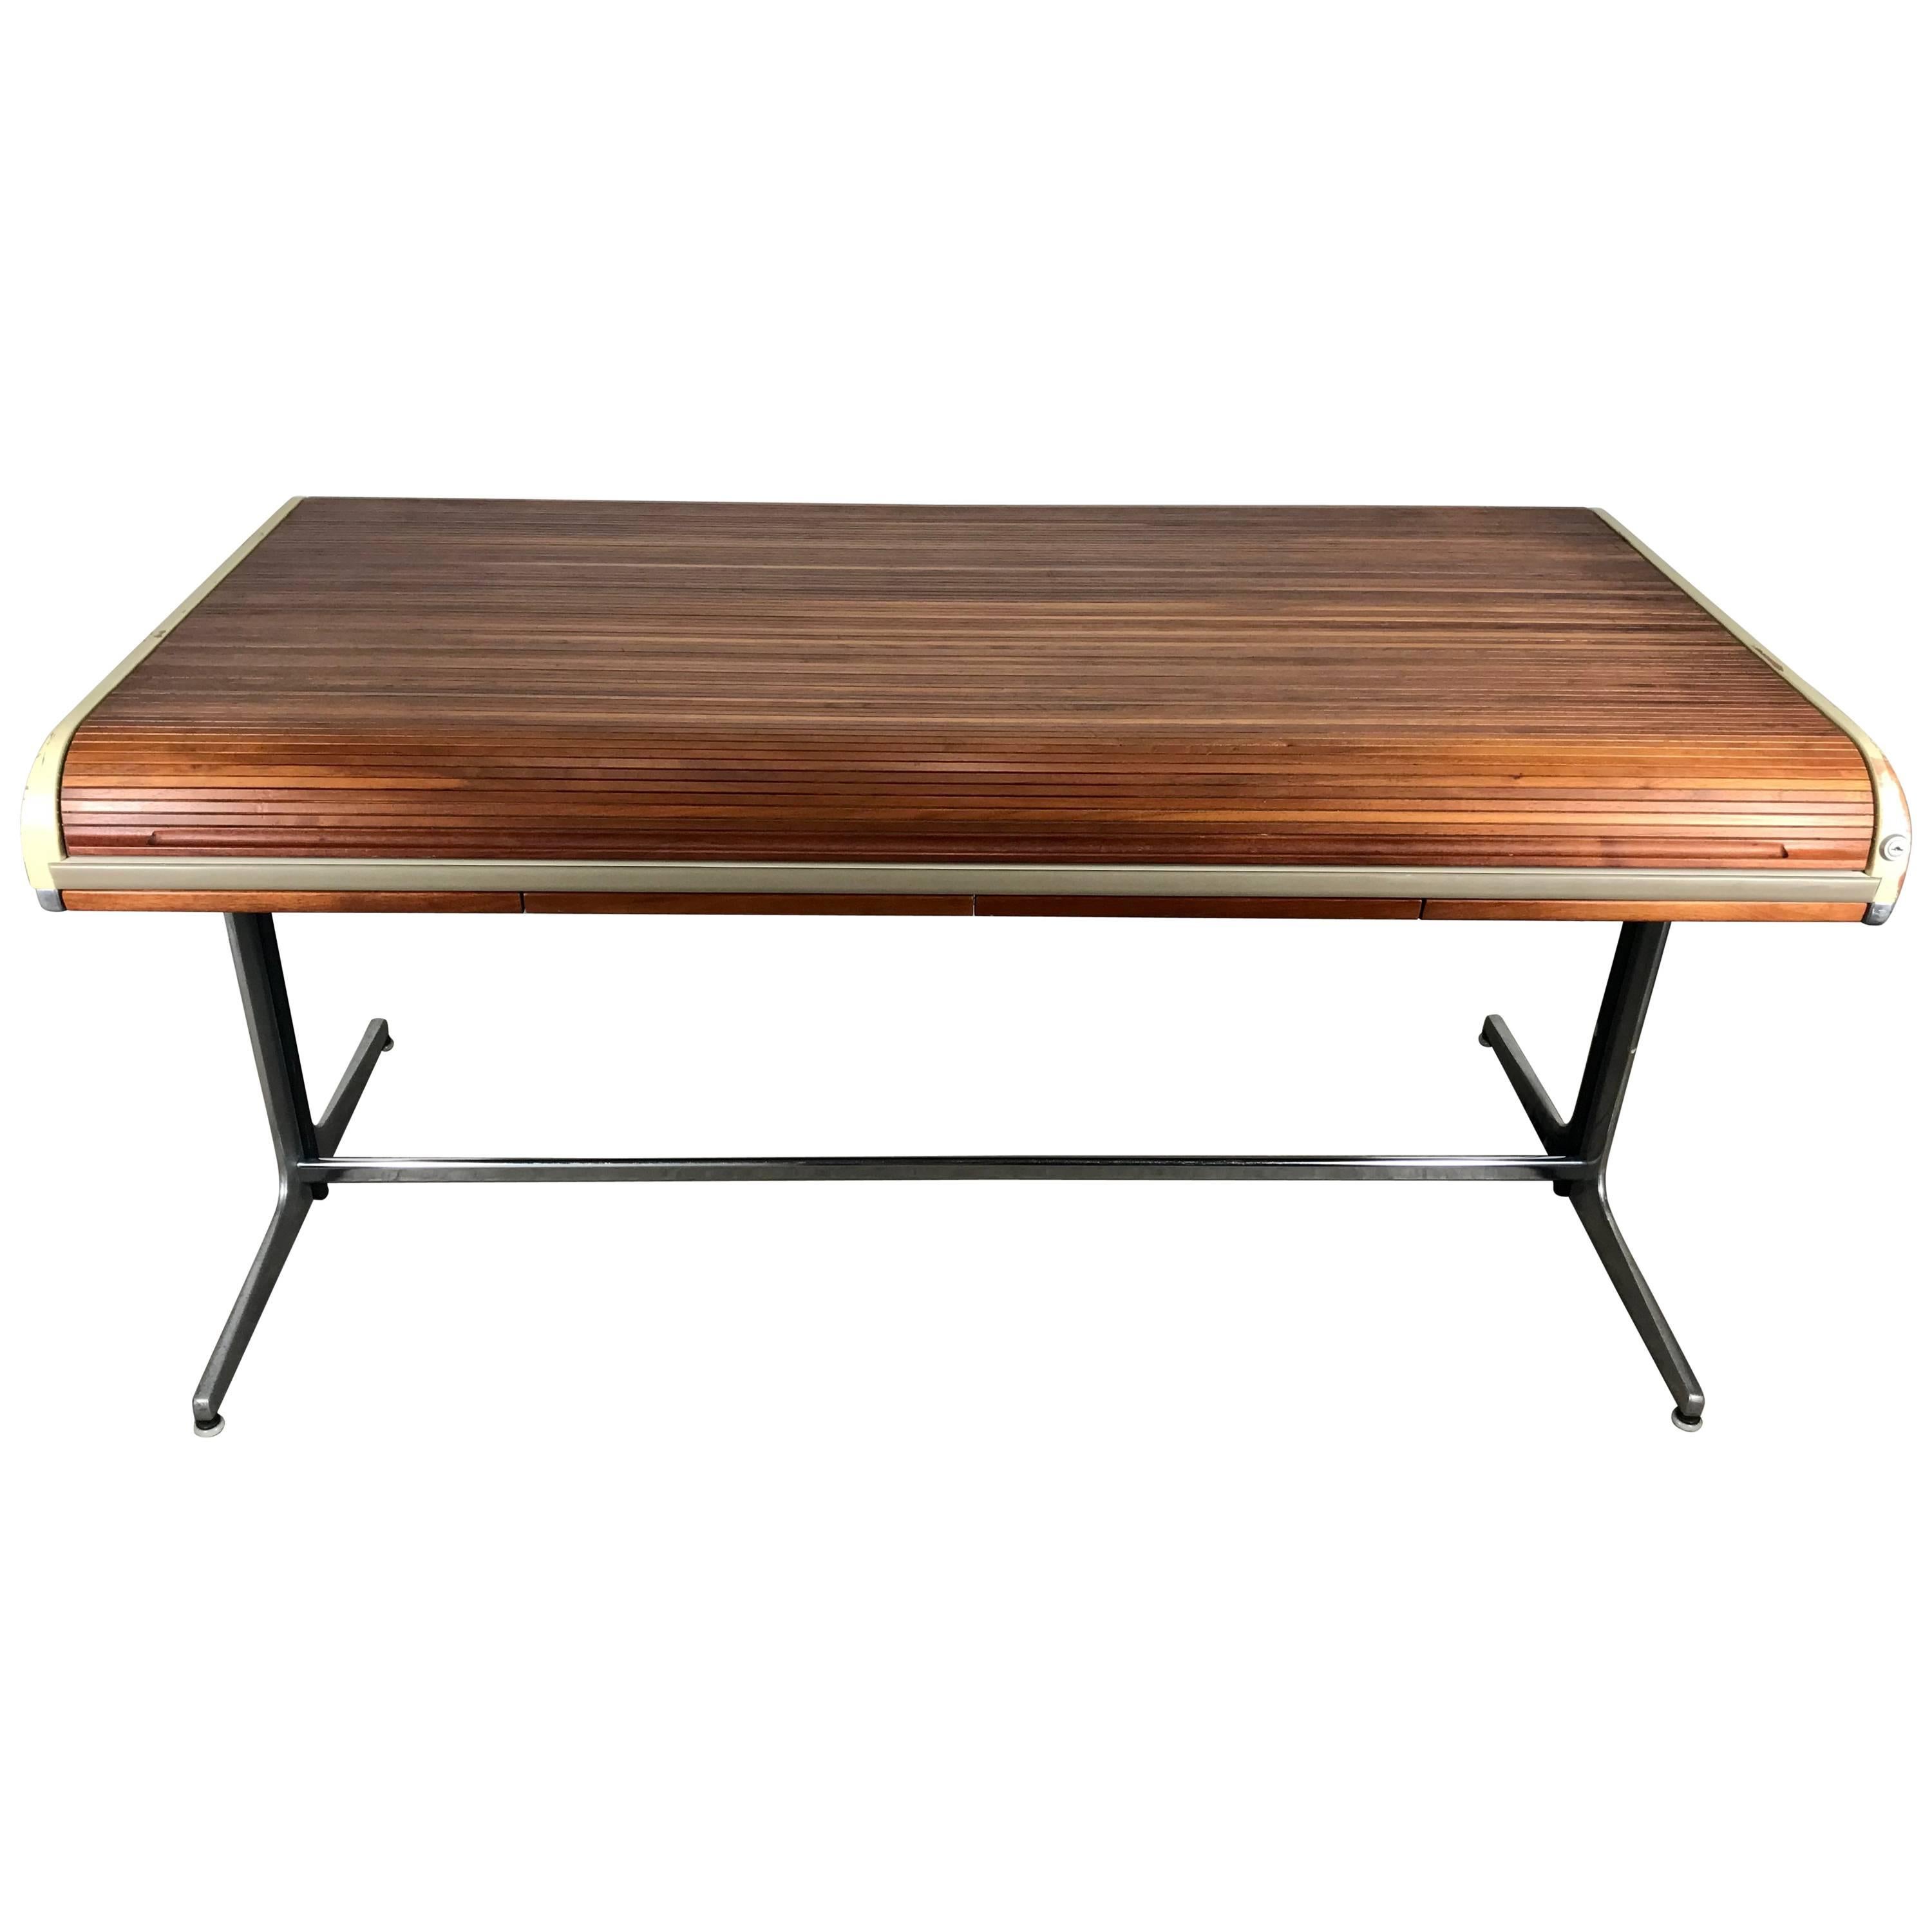 Early Modernist George Nelson Tambour Roll Top Desk, 1964